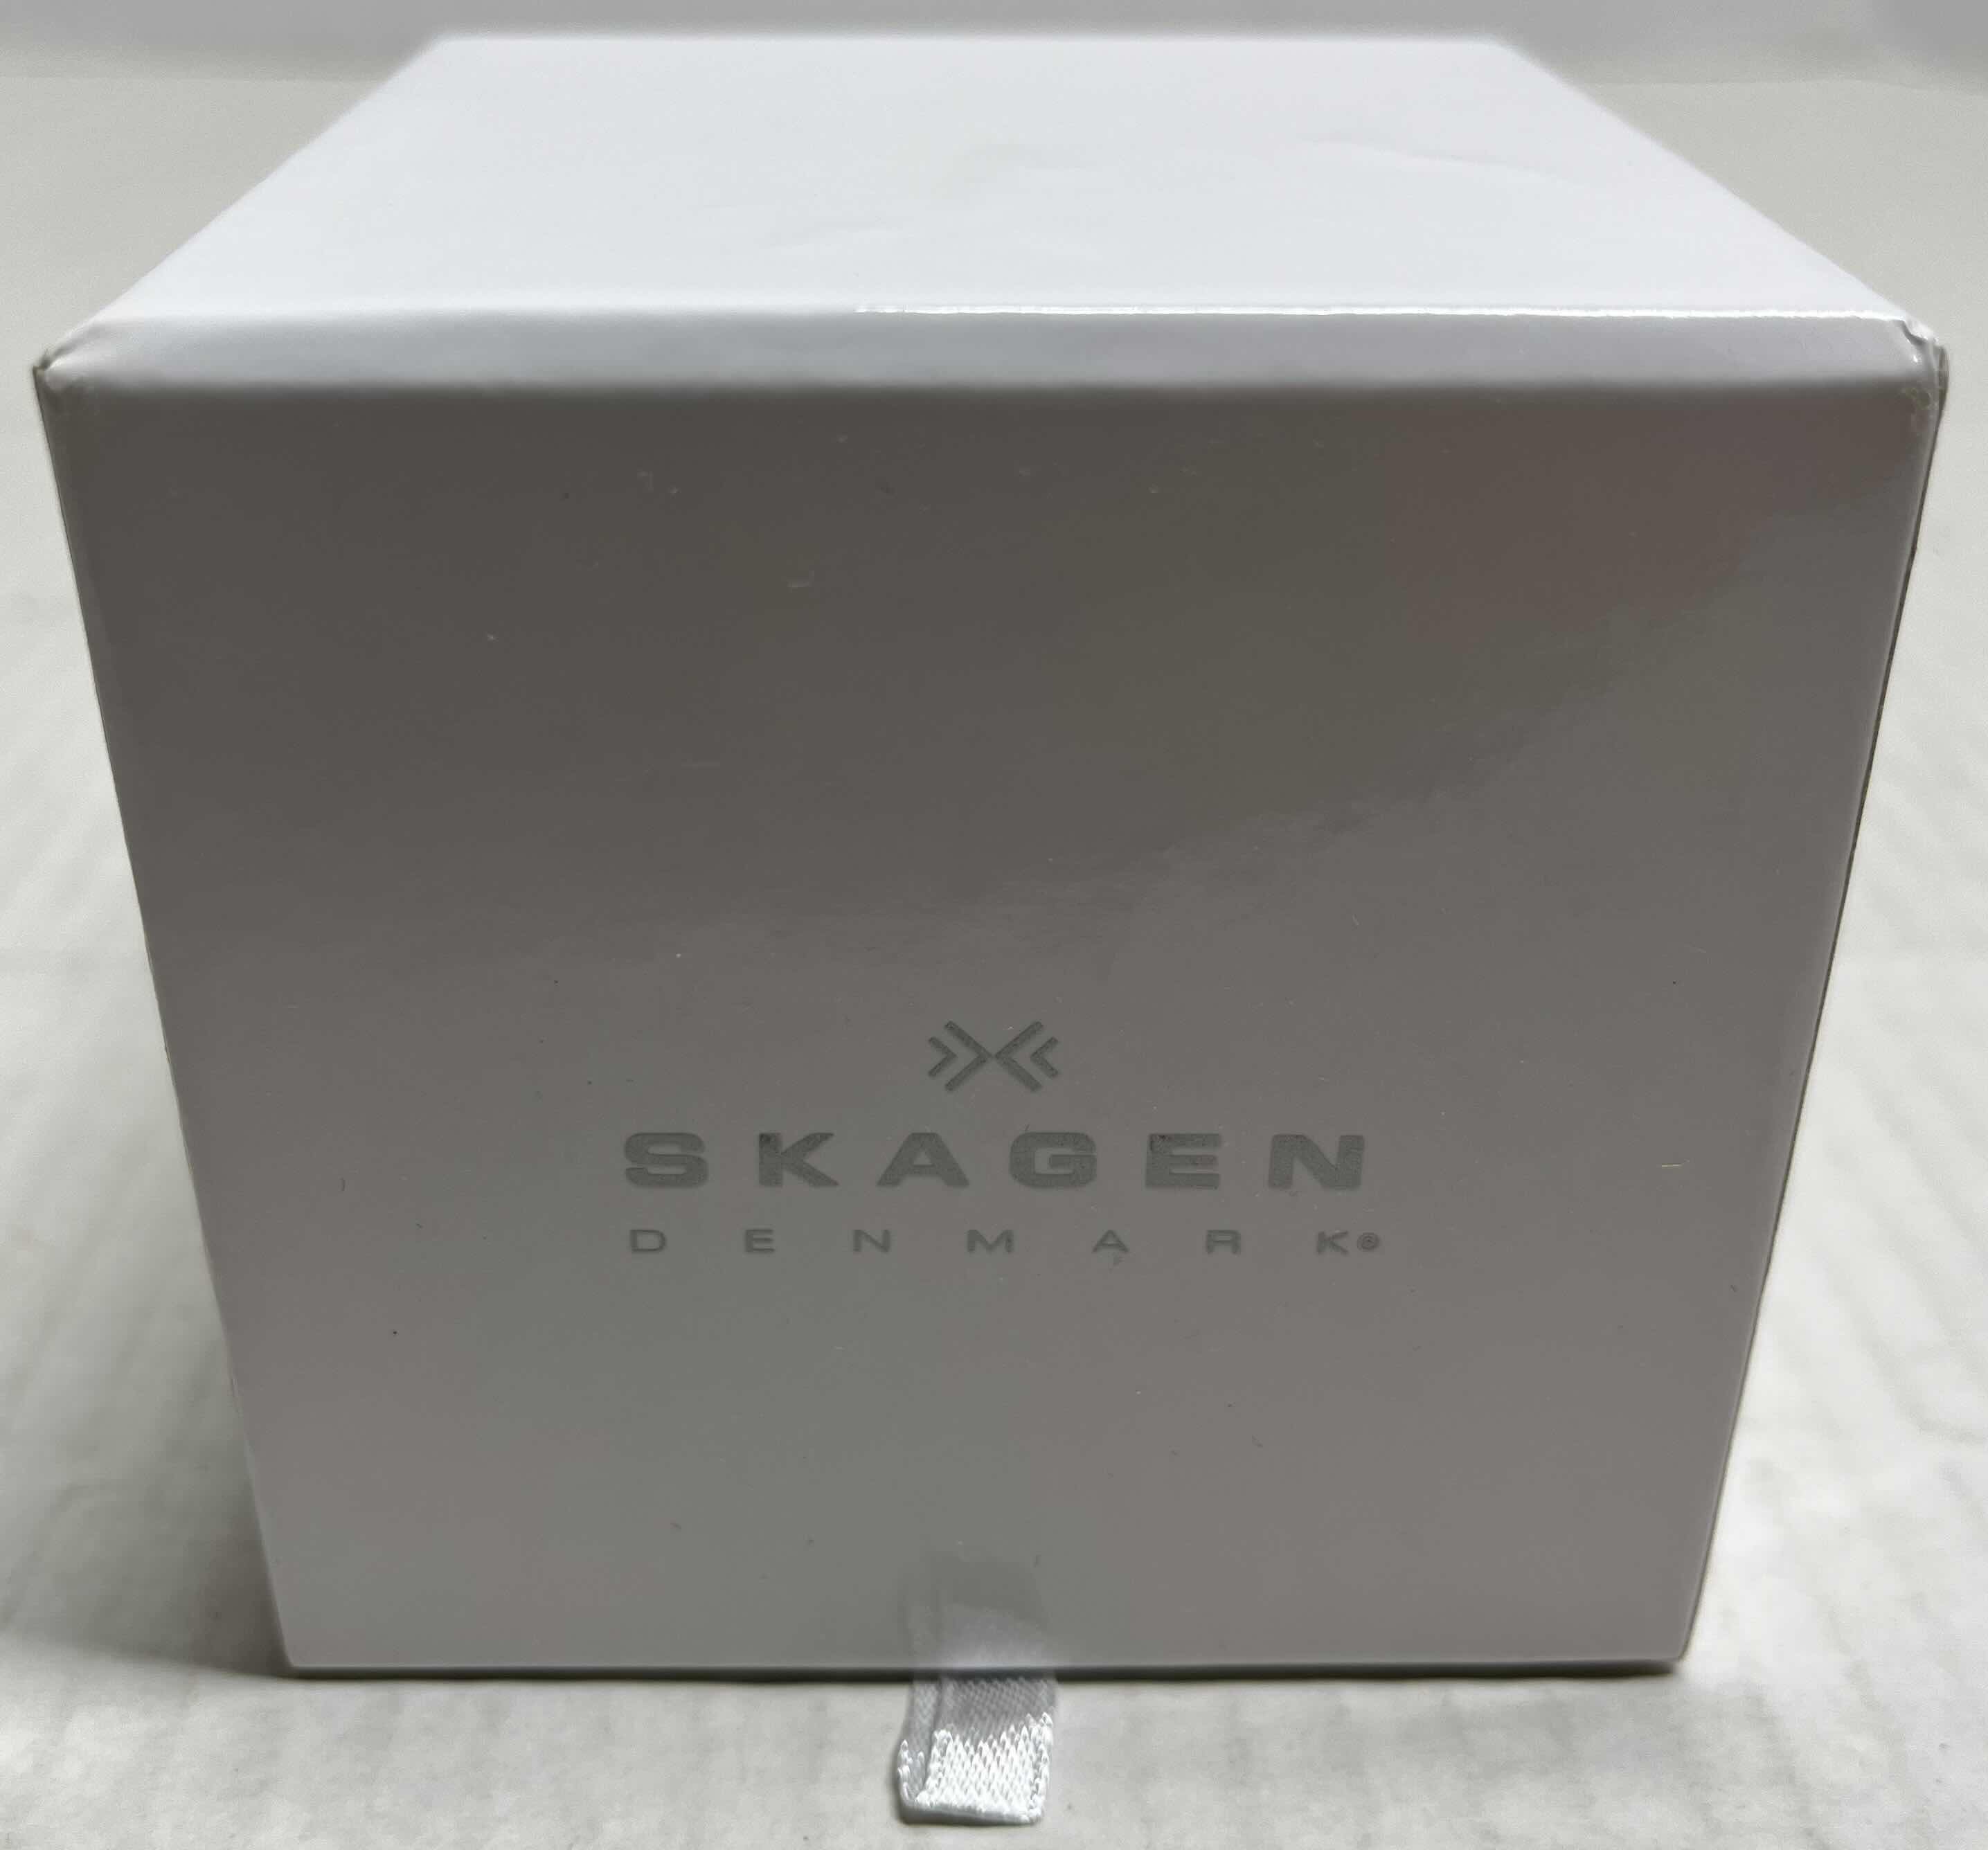 Photo 4 of SKAGEN DENMARK WOMENS ANALOG WATCH W STAINLESS STEEL CASE & MESH BAND, MOTHER OF PEARL INLAY & SWAROVSKI CRYSTALS MODEL 458SSSW